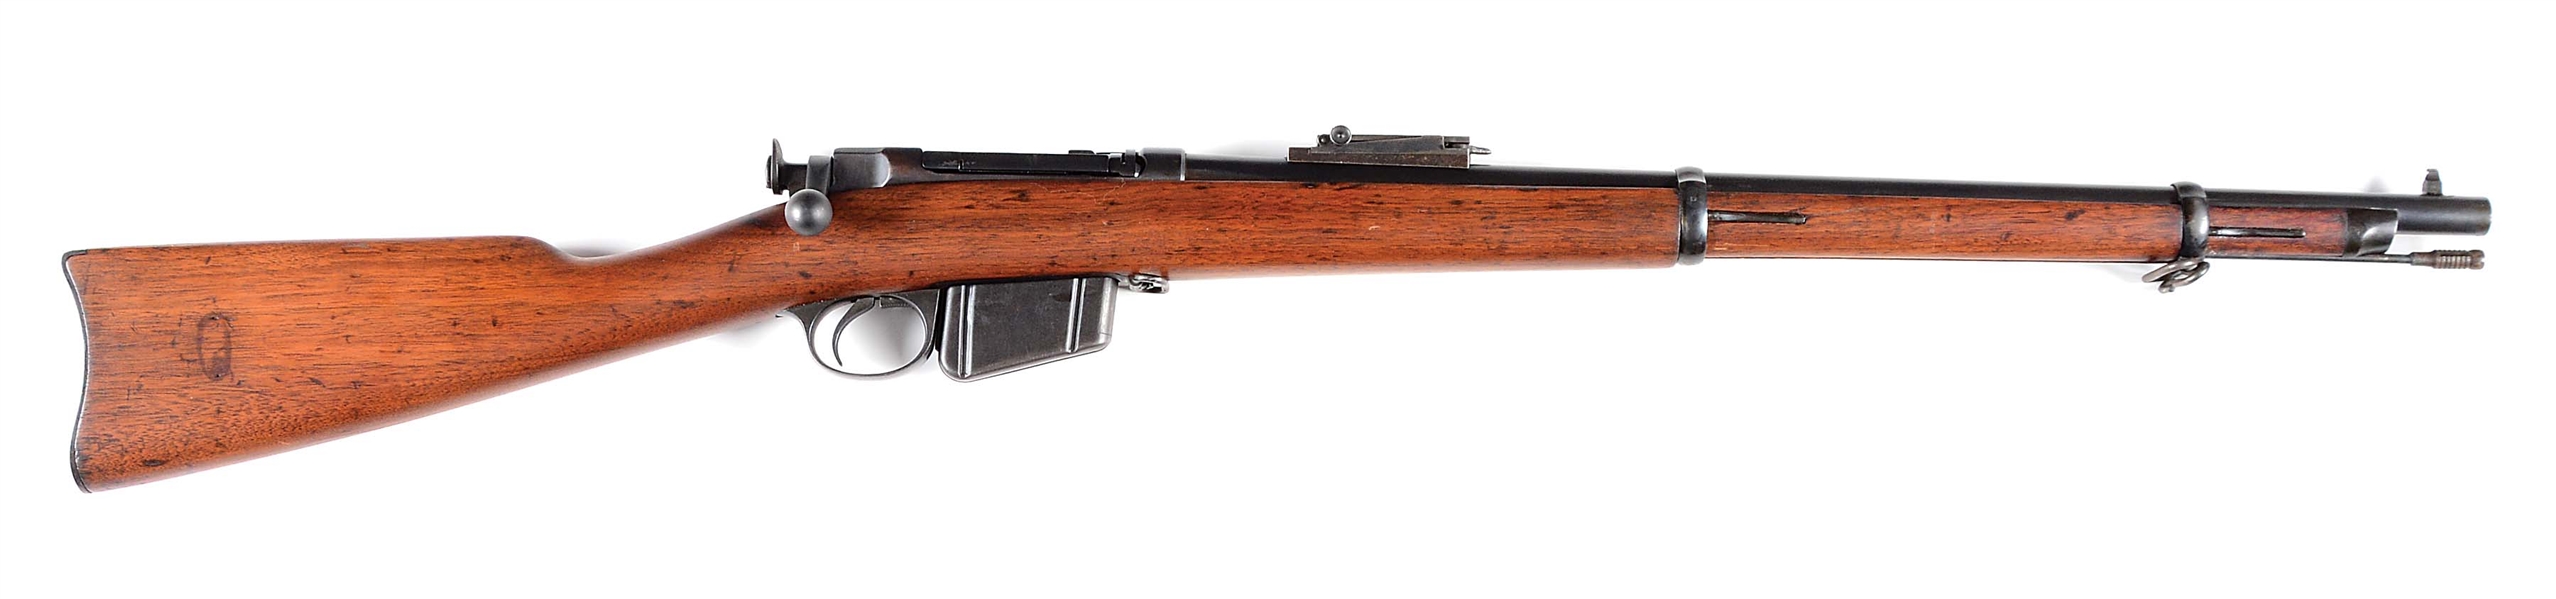 (A) REMINGTON-LEE NAVY M1885 BOLT ACTION RIFLE WITH 2 EXTRA MAGAZINES.